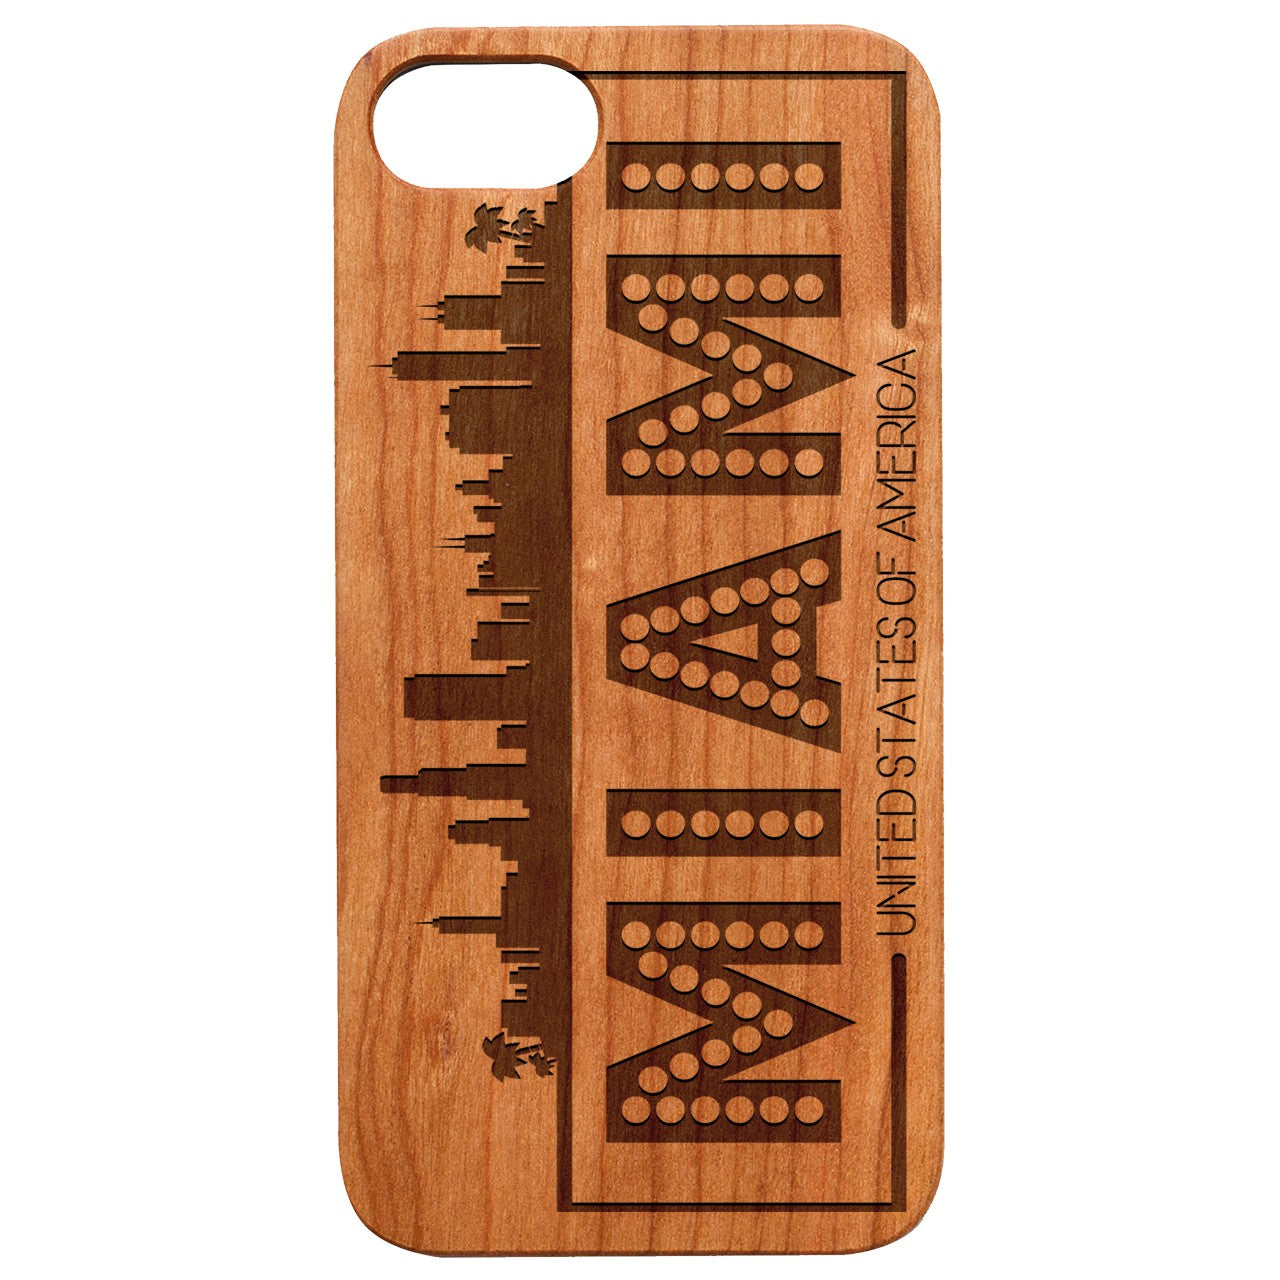  Miami City - Engraved - Wooden Phone Case - IPhone 13 Models